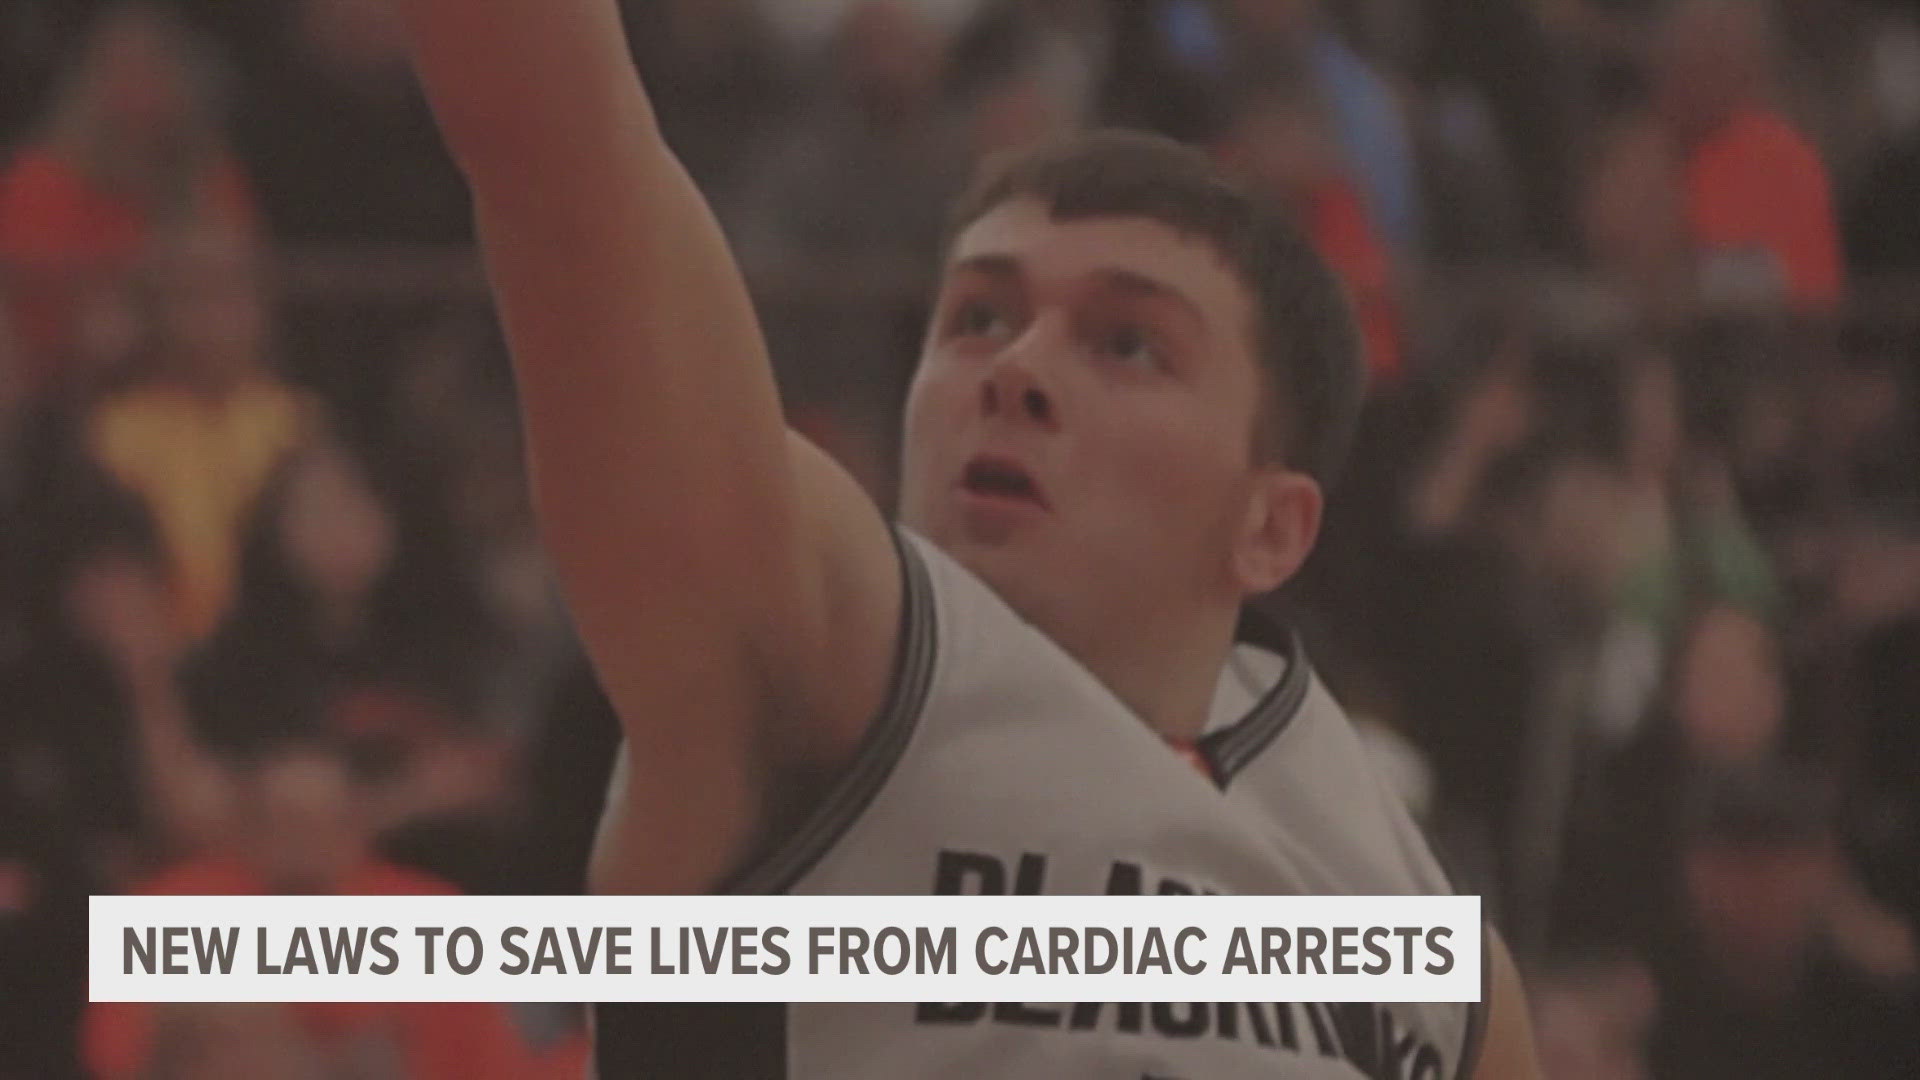 13 years after 16-year-old Wes Leonard passed away from a sudden cardiac arrest, his coach said the new laws give him hope that more students will be saved.